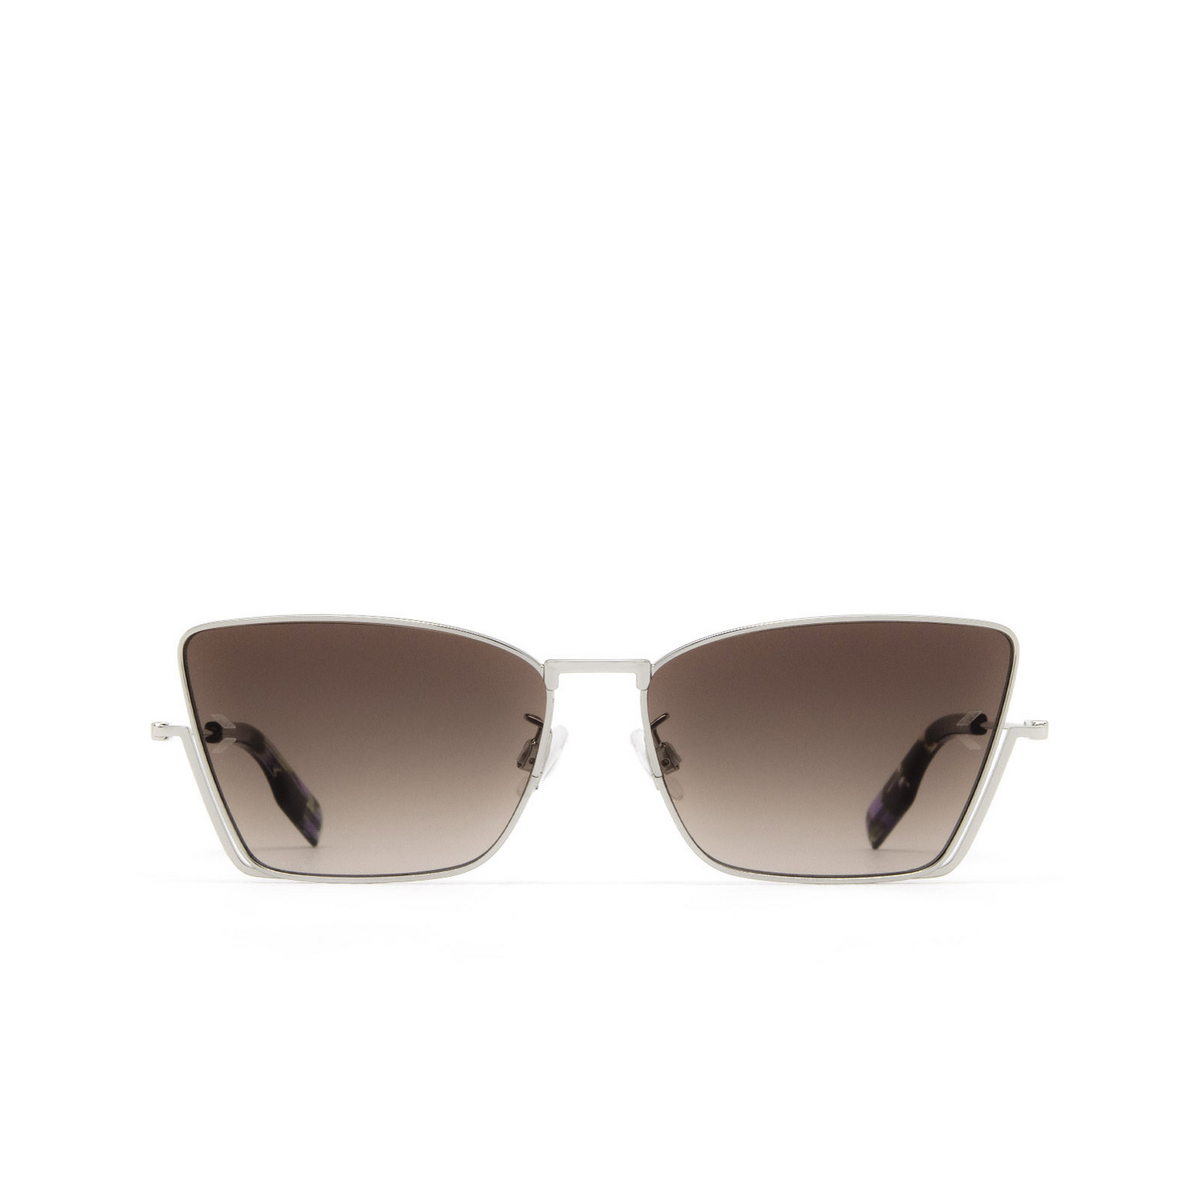 Alexander McQueen® Cat-eye Sunglasses: MQ0350S color 003 Silver - front view